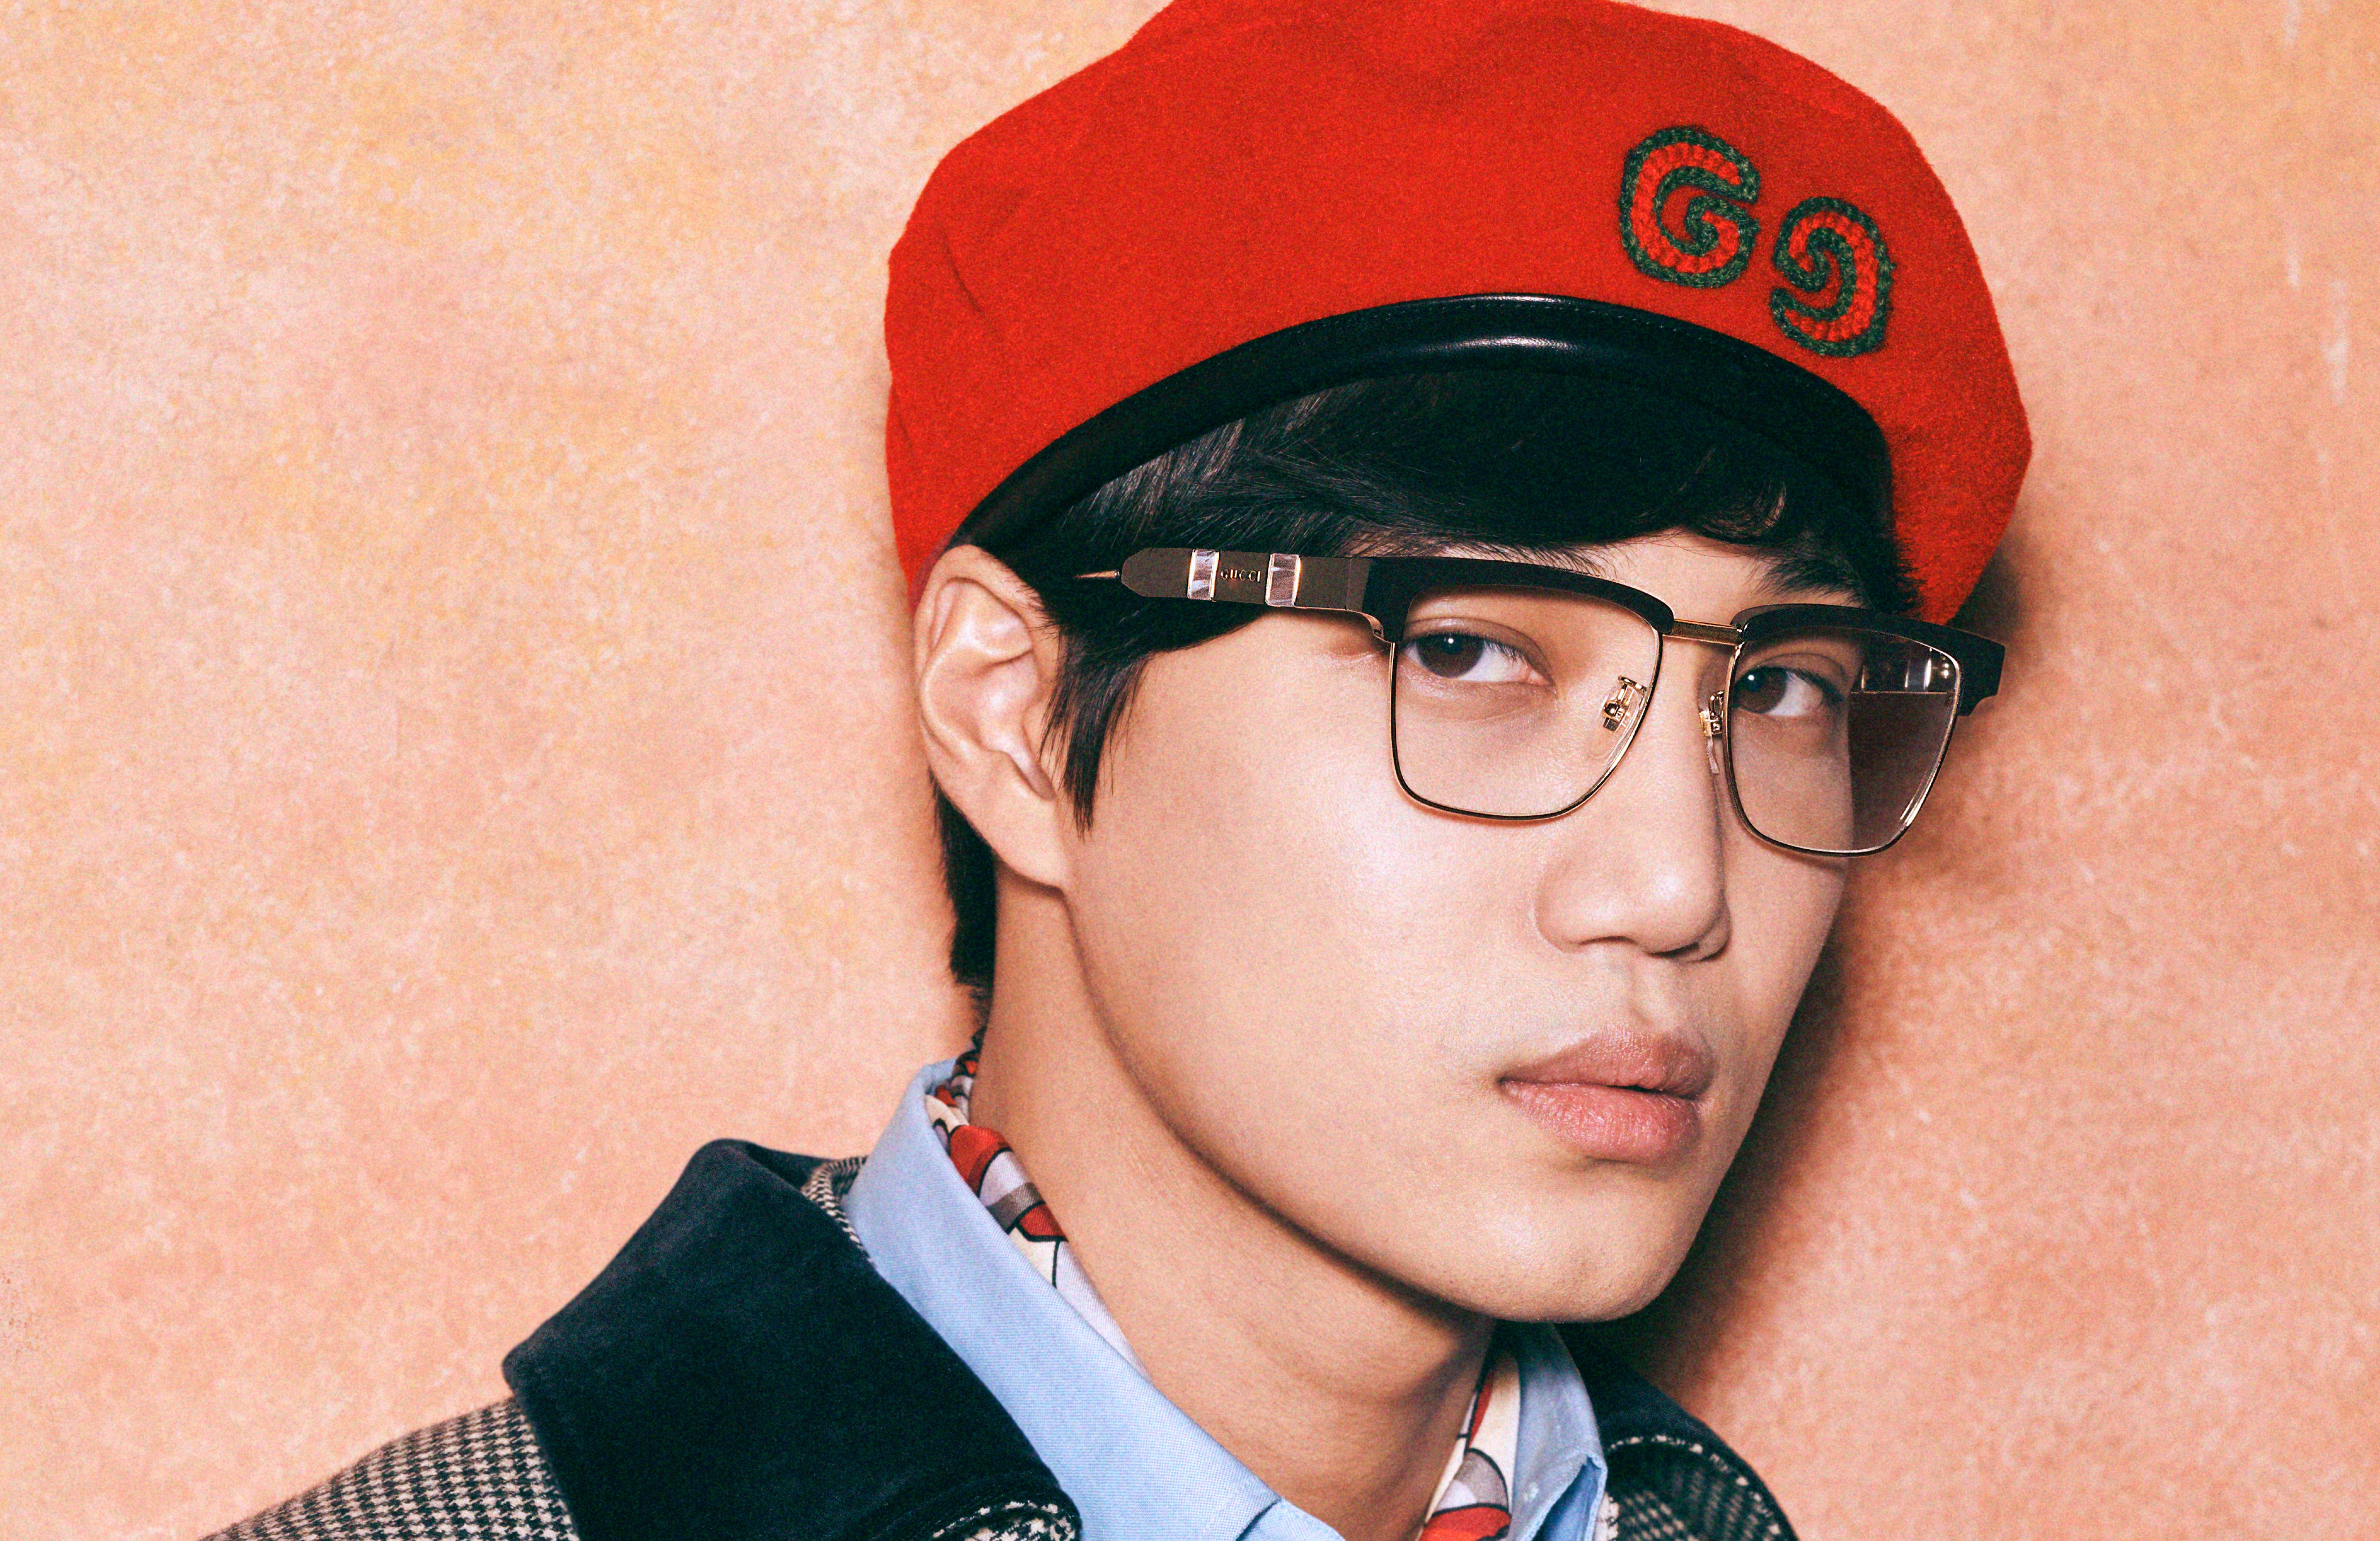 Tirannie lied zoet STYLE Edit: Kai from K-pop band Exo and Chinese actress Ni Ni rock Gucci  glasses in new eyewear campaign | South China Morning Post